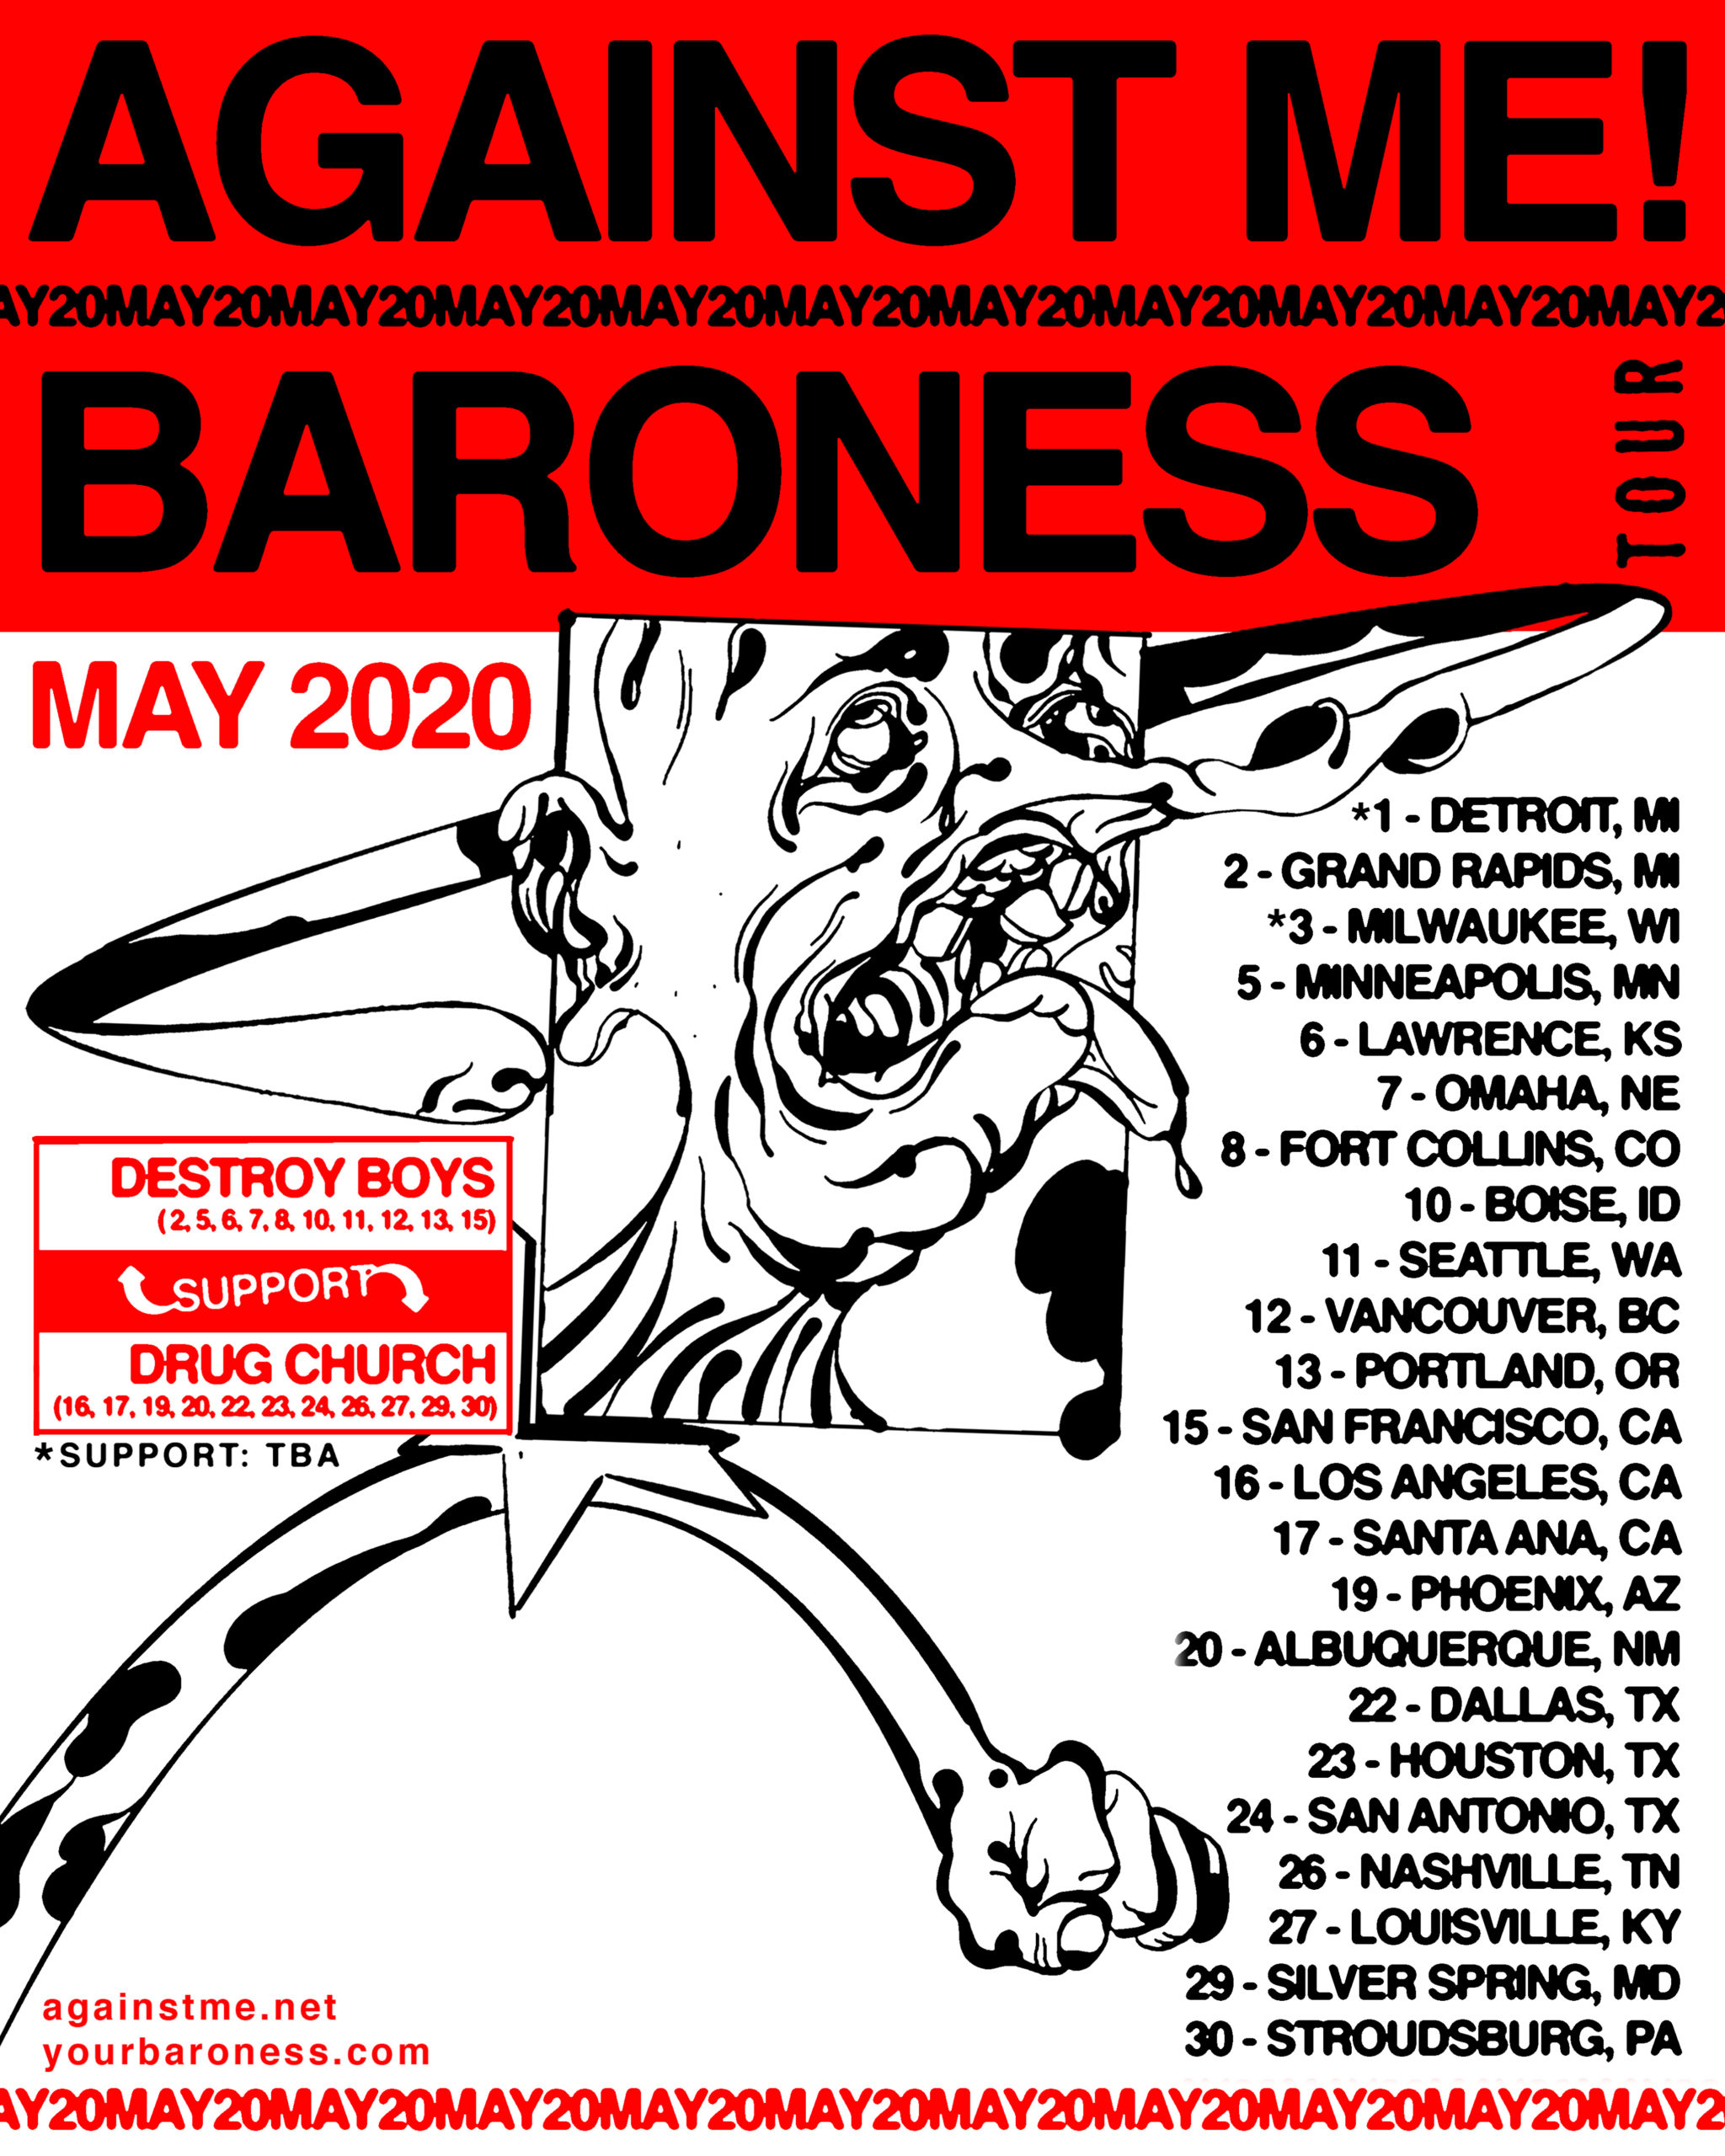 BARONESS ANNOUNCES MAY CO-HEADLINE TOUR WITH AGAINST ME!